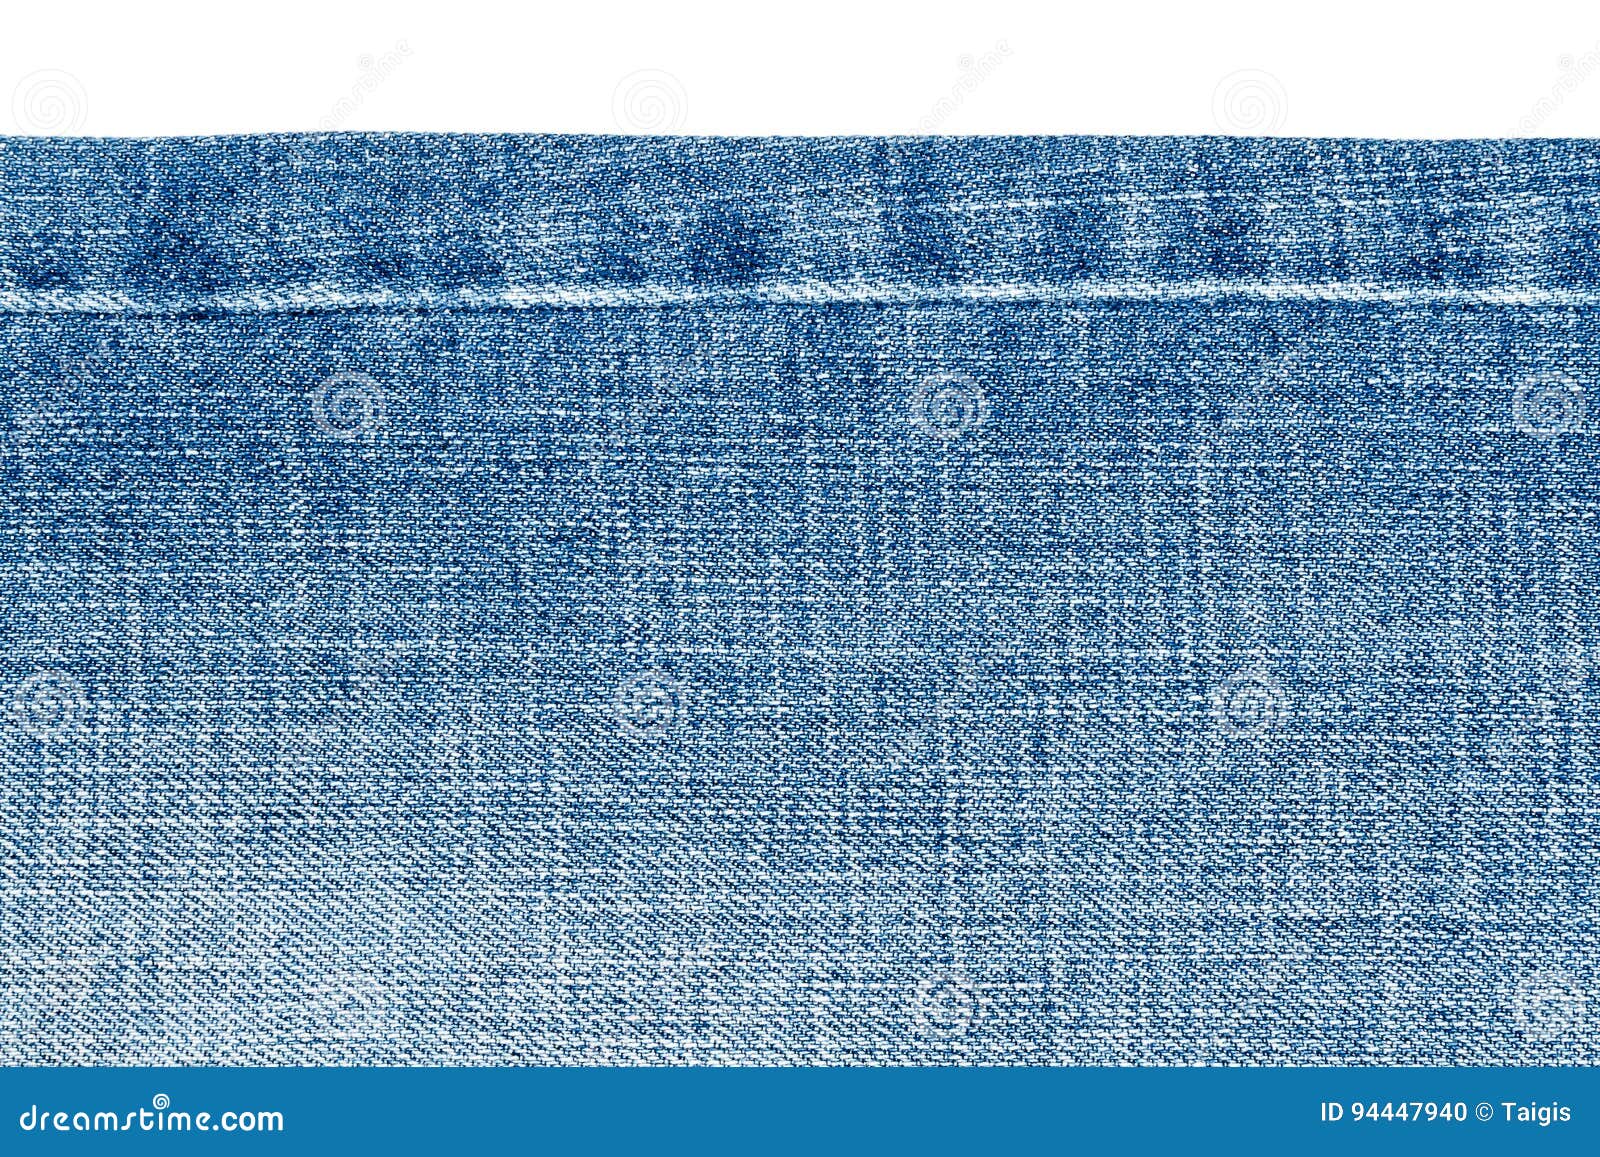 Piece of Light Blue Jeans Fabric Stock Photo - Image of canvas, fabric ...